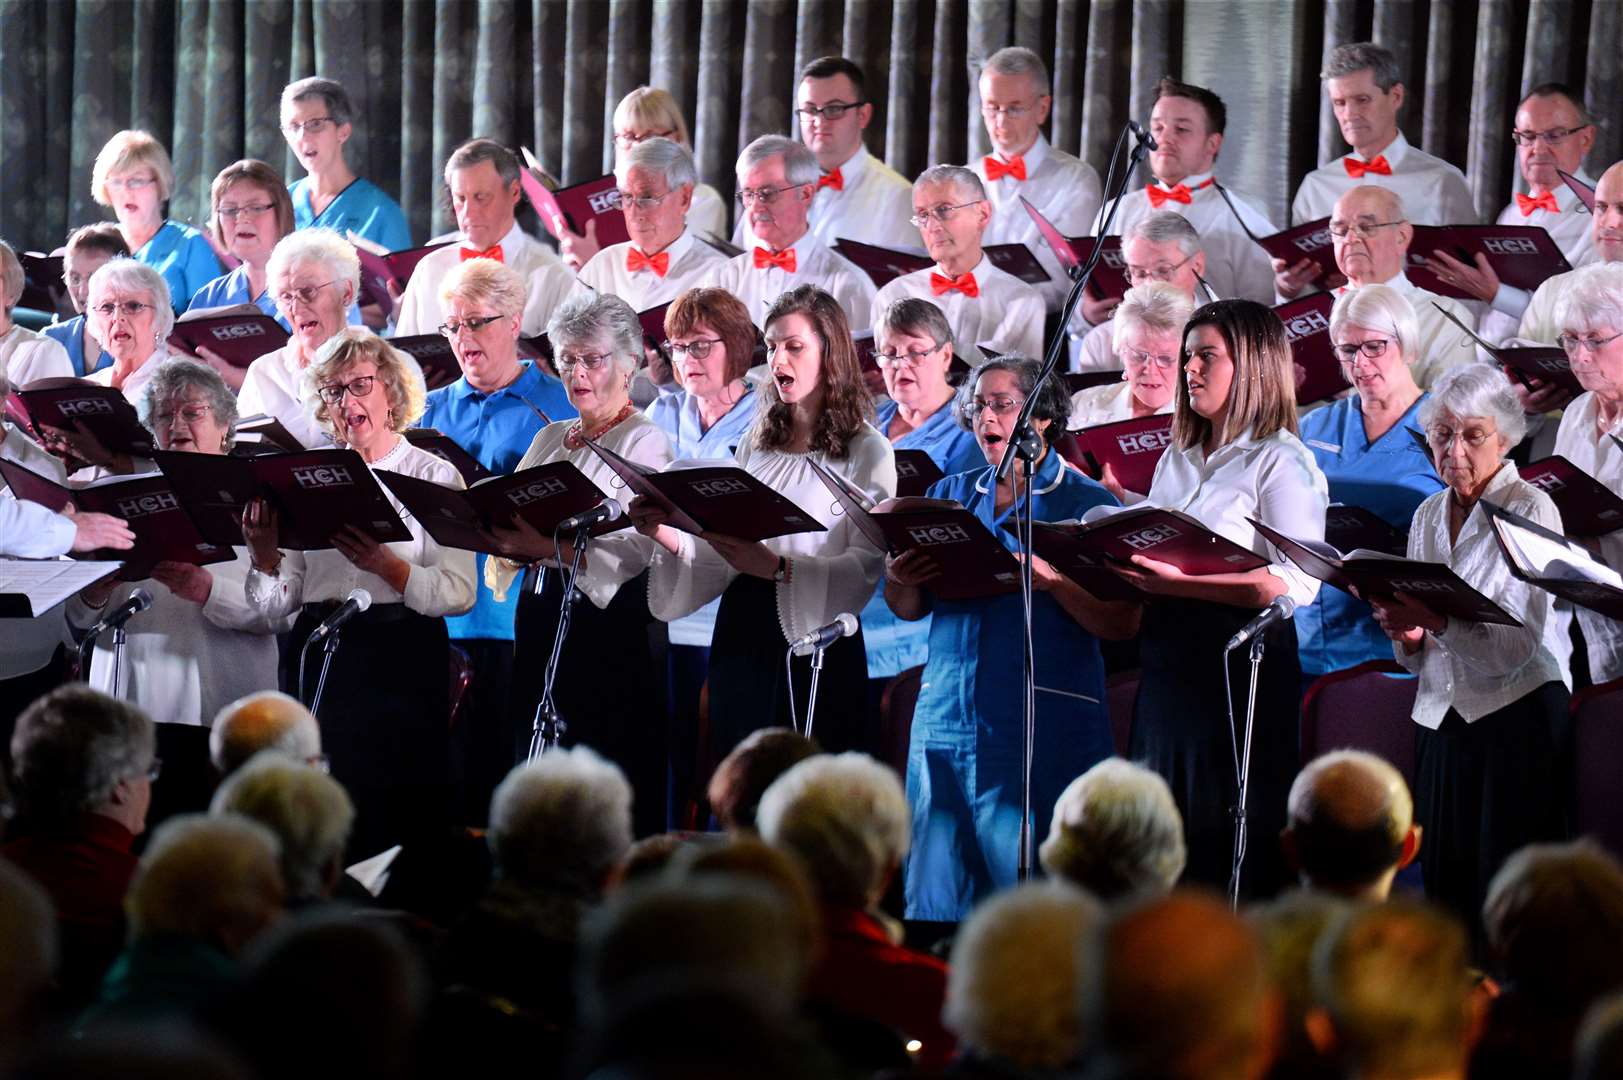 The choir of NHS staff raises funds annually for cancer charity CLIC Sargent.